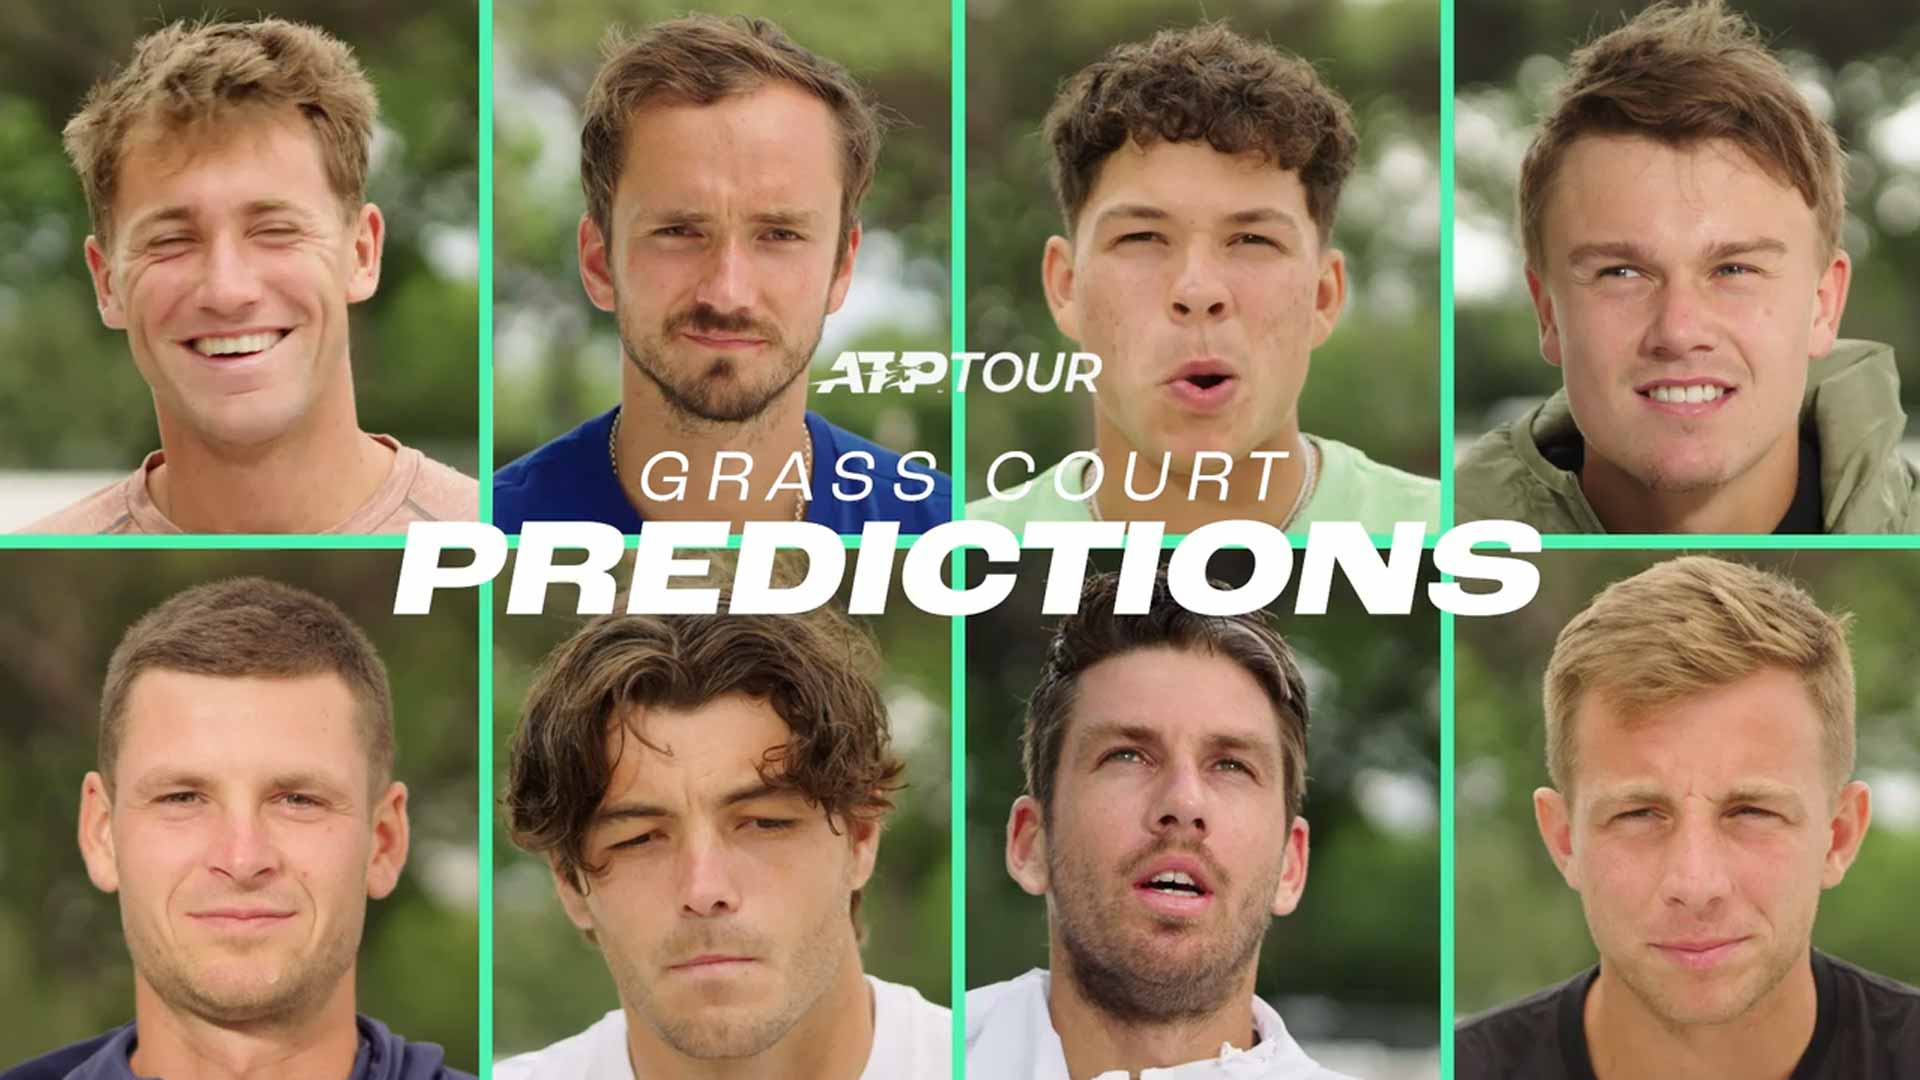 Hilarious Medvedev moment highlights ATP stars' grass-court predictions